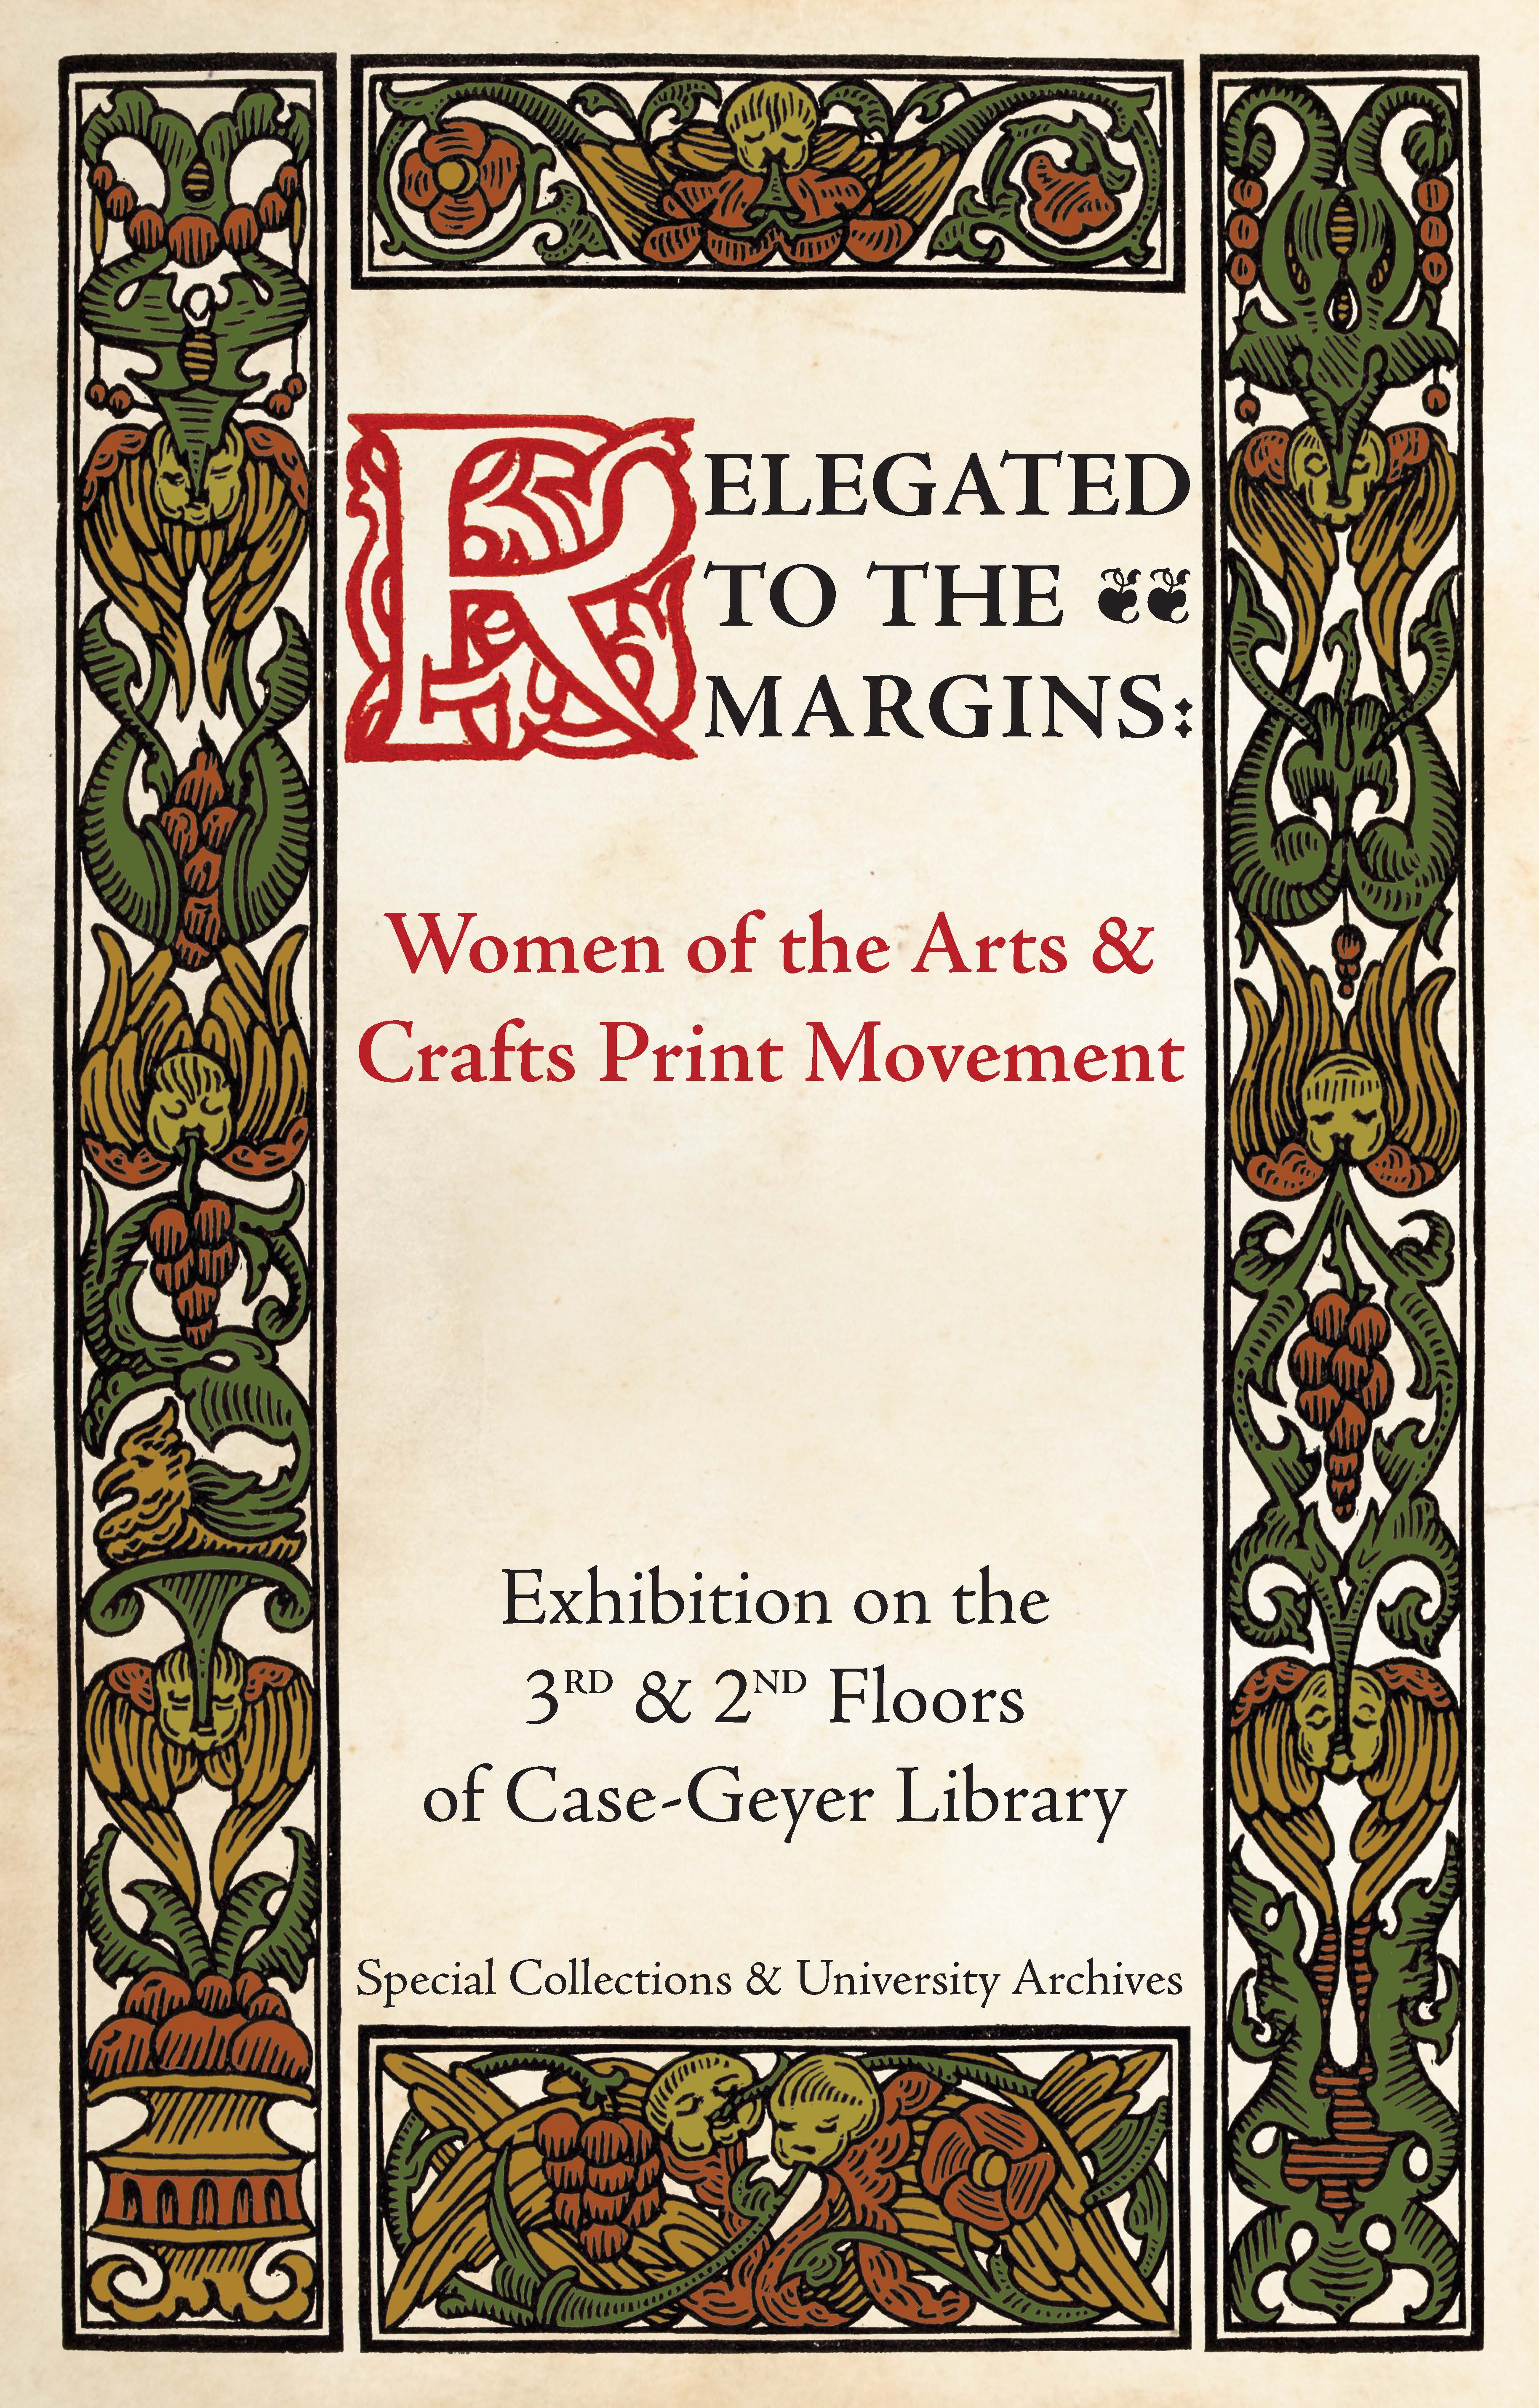 Poster for exhibition titled "Relegated to the Margins: Women of the Arts & Crafts Print Movement"